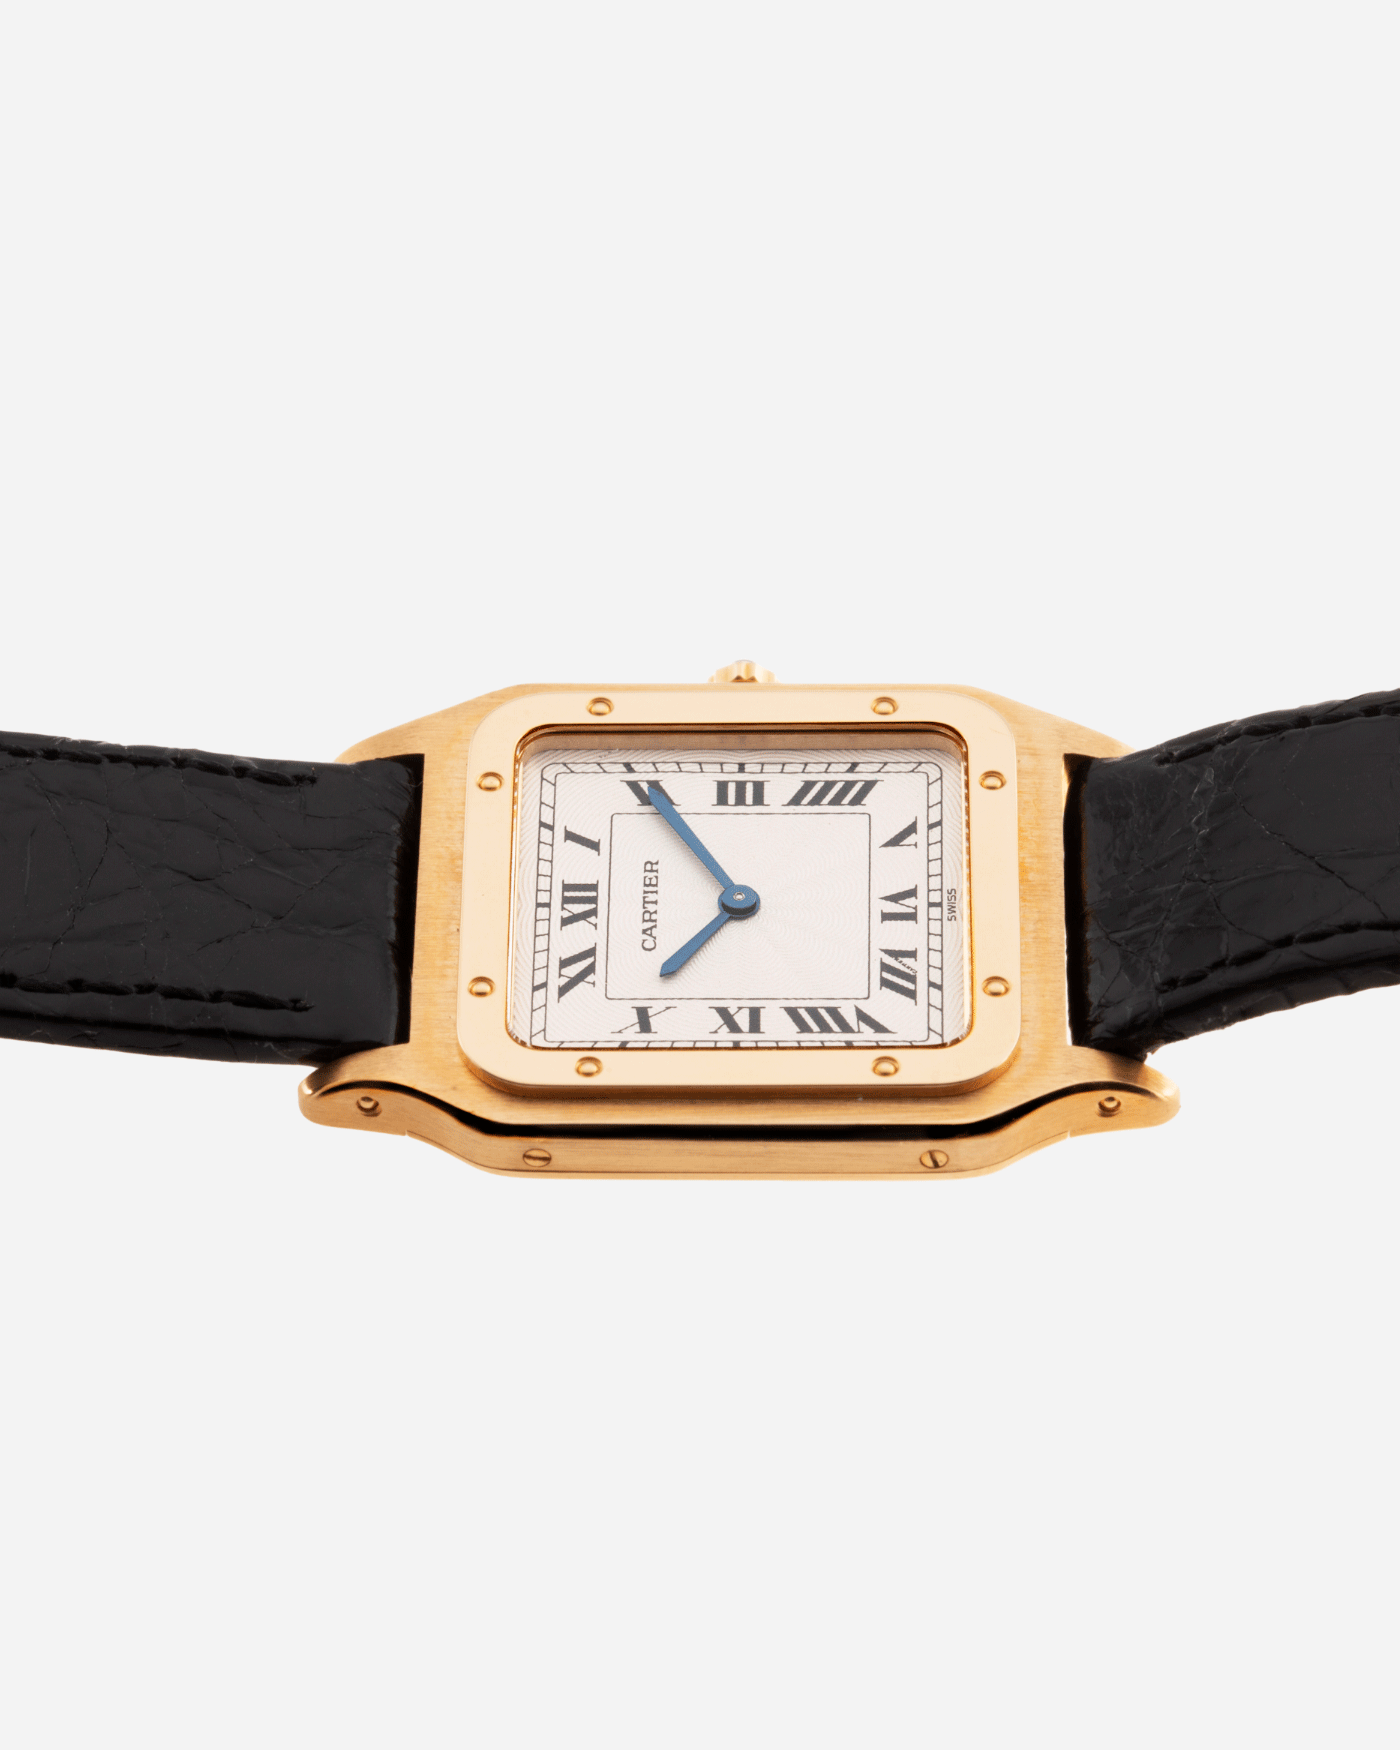 Brand: Cartier Year: 1990s Model: Santos Dumont Reference: 1576 Material: 18k Yellow Gold Movement: F.Piguet 21 Case Diameter: 27mm Strap: Black Leather Strap with Cartier 18k Yellow Gold Tang Buckle